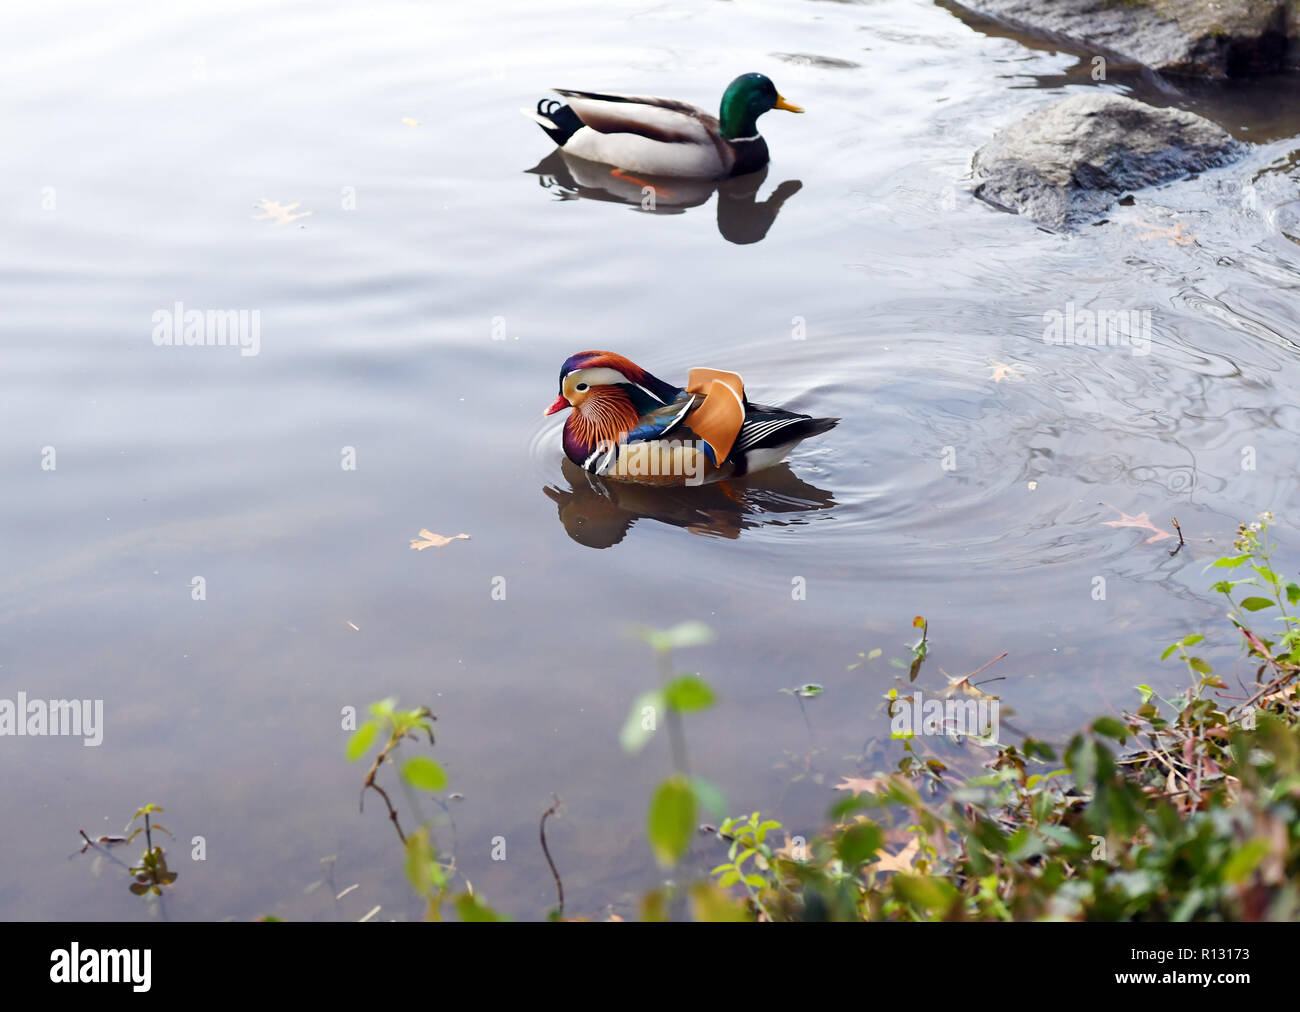 New York, USA. 8th Nov, 2018. A Mandarin duck (Front) paddles on a pond at the Central Park in New York, the United States, on Nov. 8, 2018. Mandarin ducks are native to East Asia and renowned for their dazzling multicolored feathers. This rare Mandarin duck, first spotted in early October, has become a new star at the Central Park, one of New York City's most-visited attractions. Credit: Li Rui/Xinhua/Alamy Live News Stock Photo